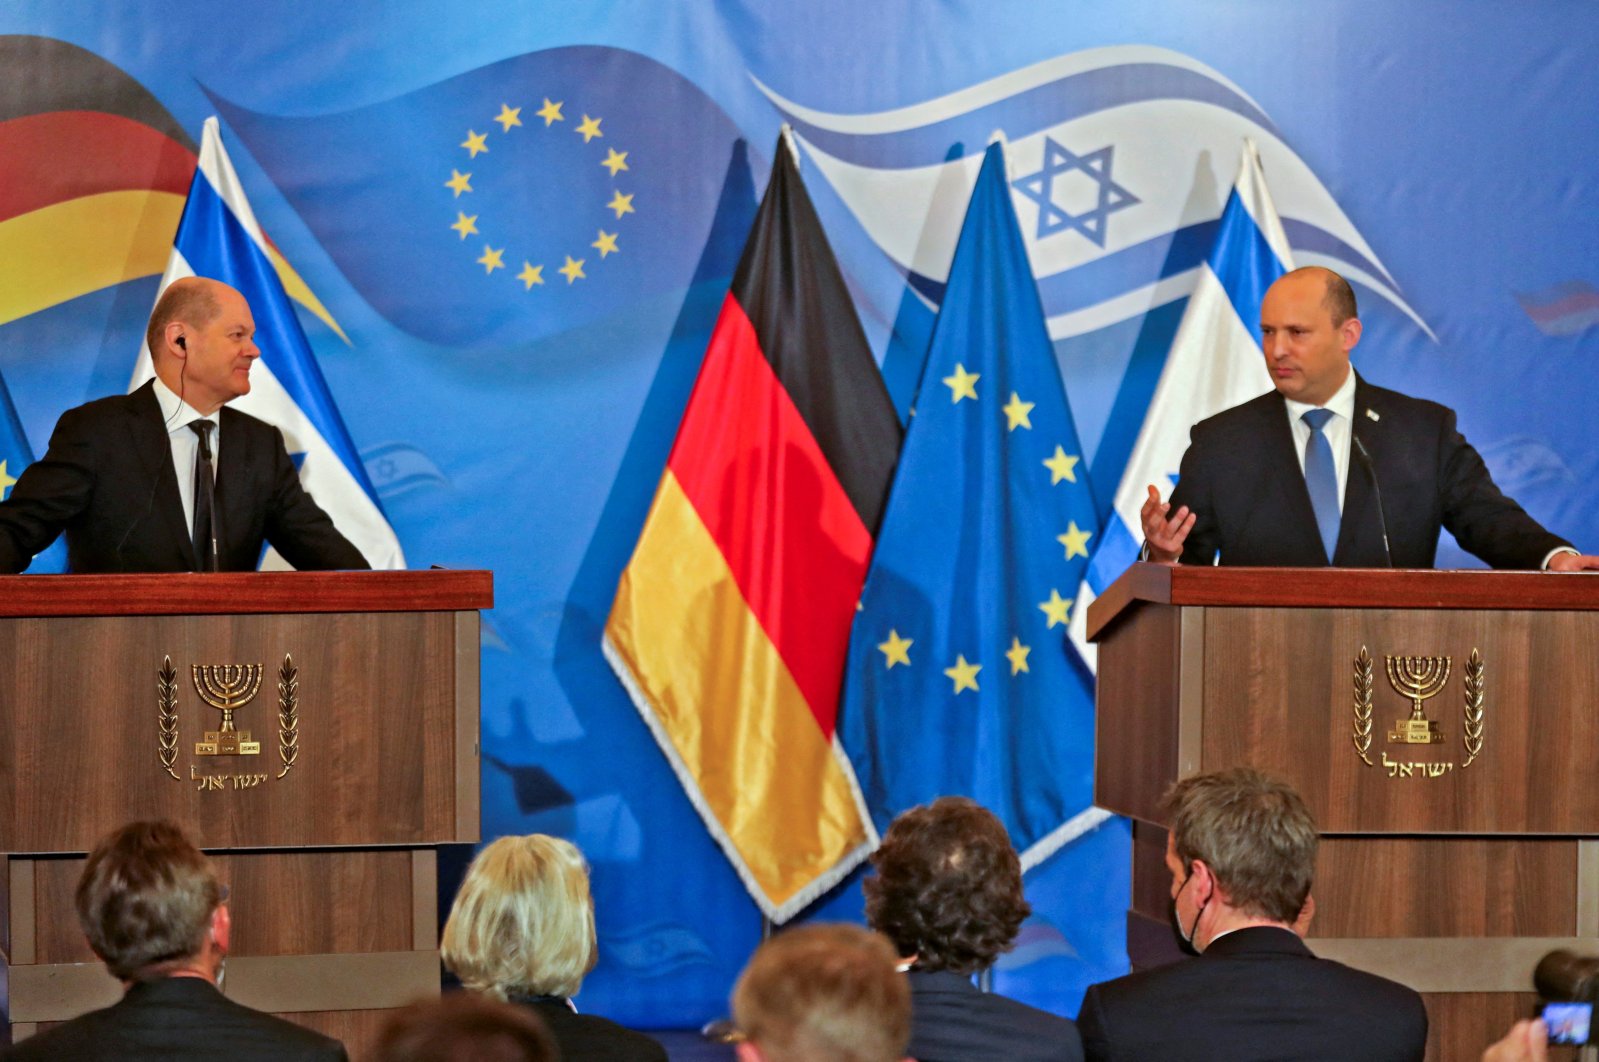 German Chancellor Olaf Scholz (L) and Israeli Prime Minister Naftali Bennett during a press conference at the King David Hotel in West Jerusalem, Israel, March 2, 2022. (Reuters Photo)